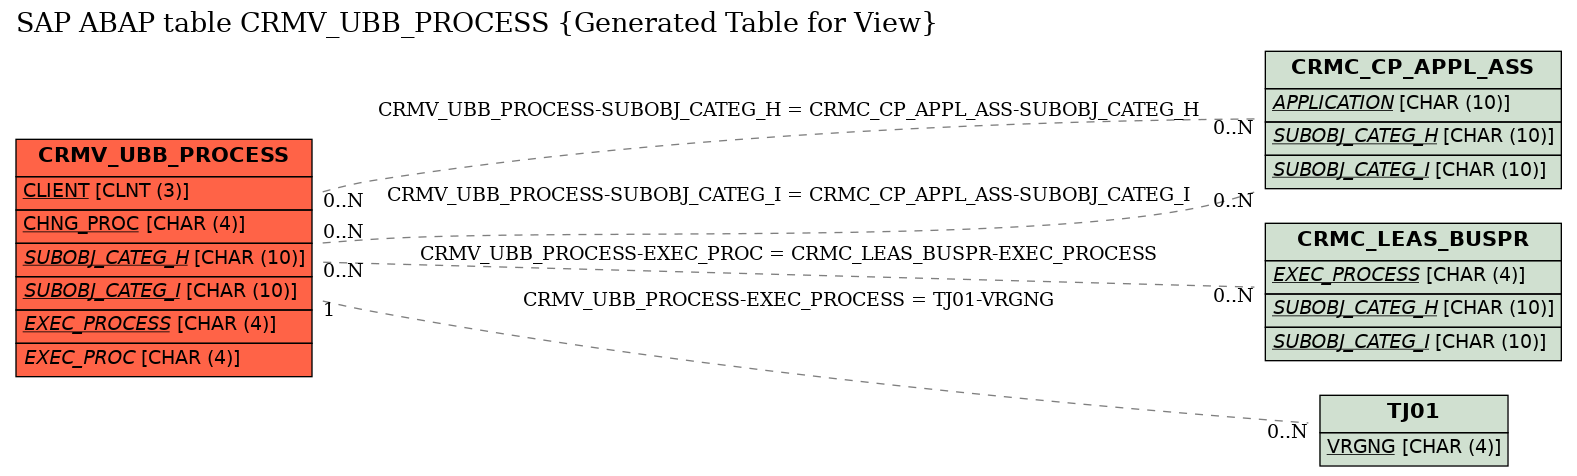 E-R Diagram for table CRMV_UBB_PROCESS (Generated Table for View)